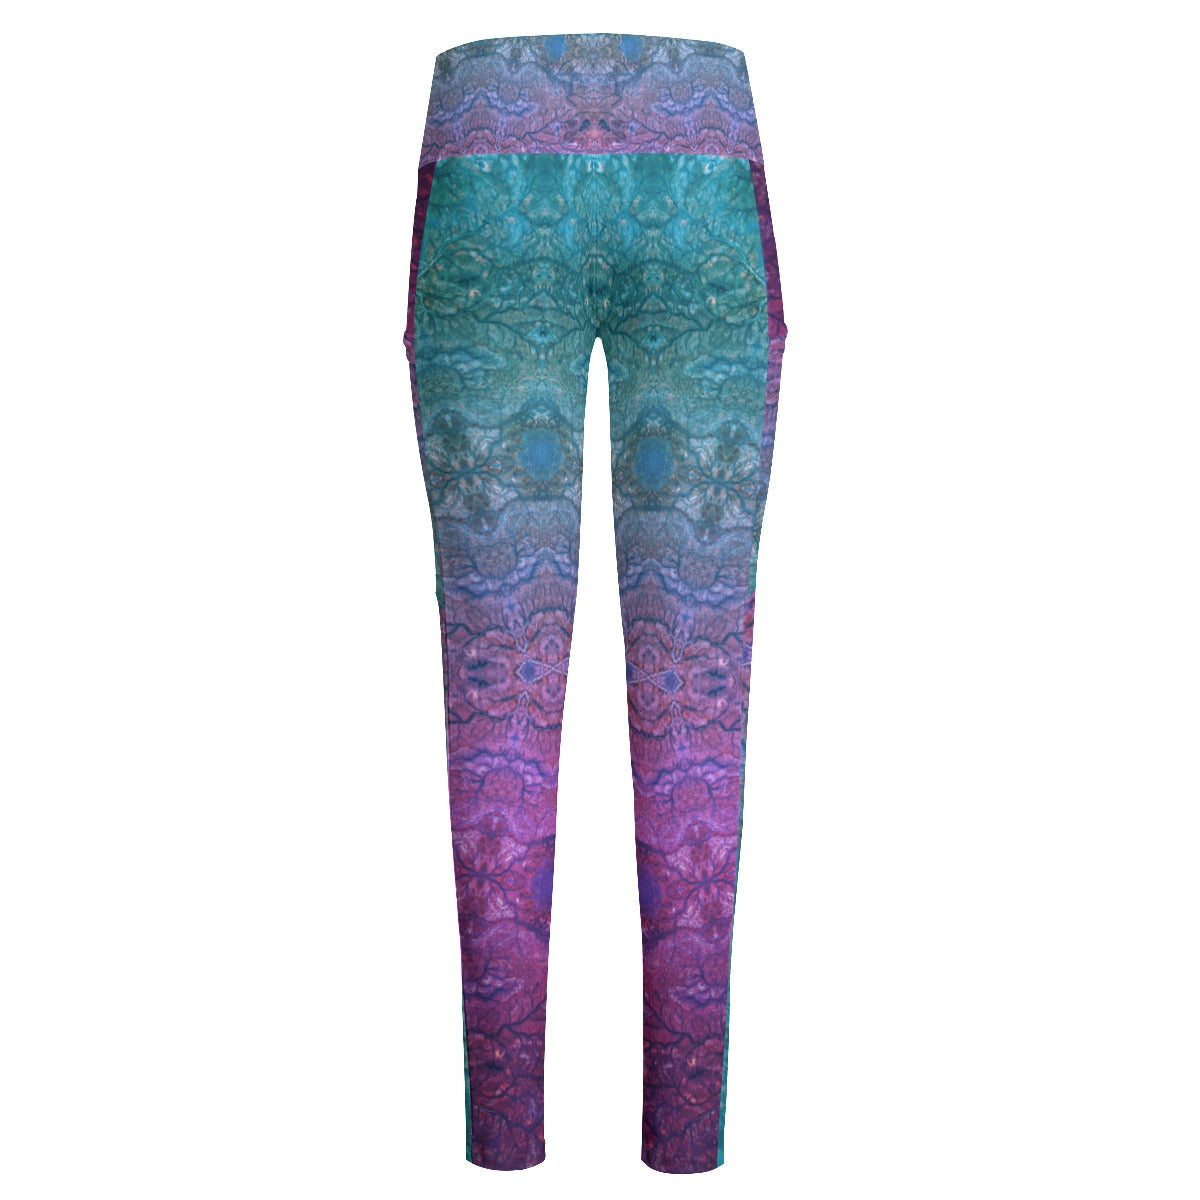 Lotus Roots High Waist Leggings With Side Pockets